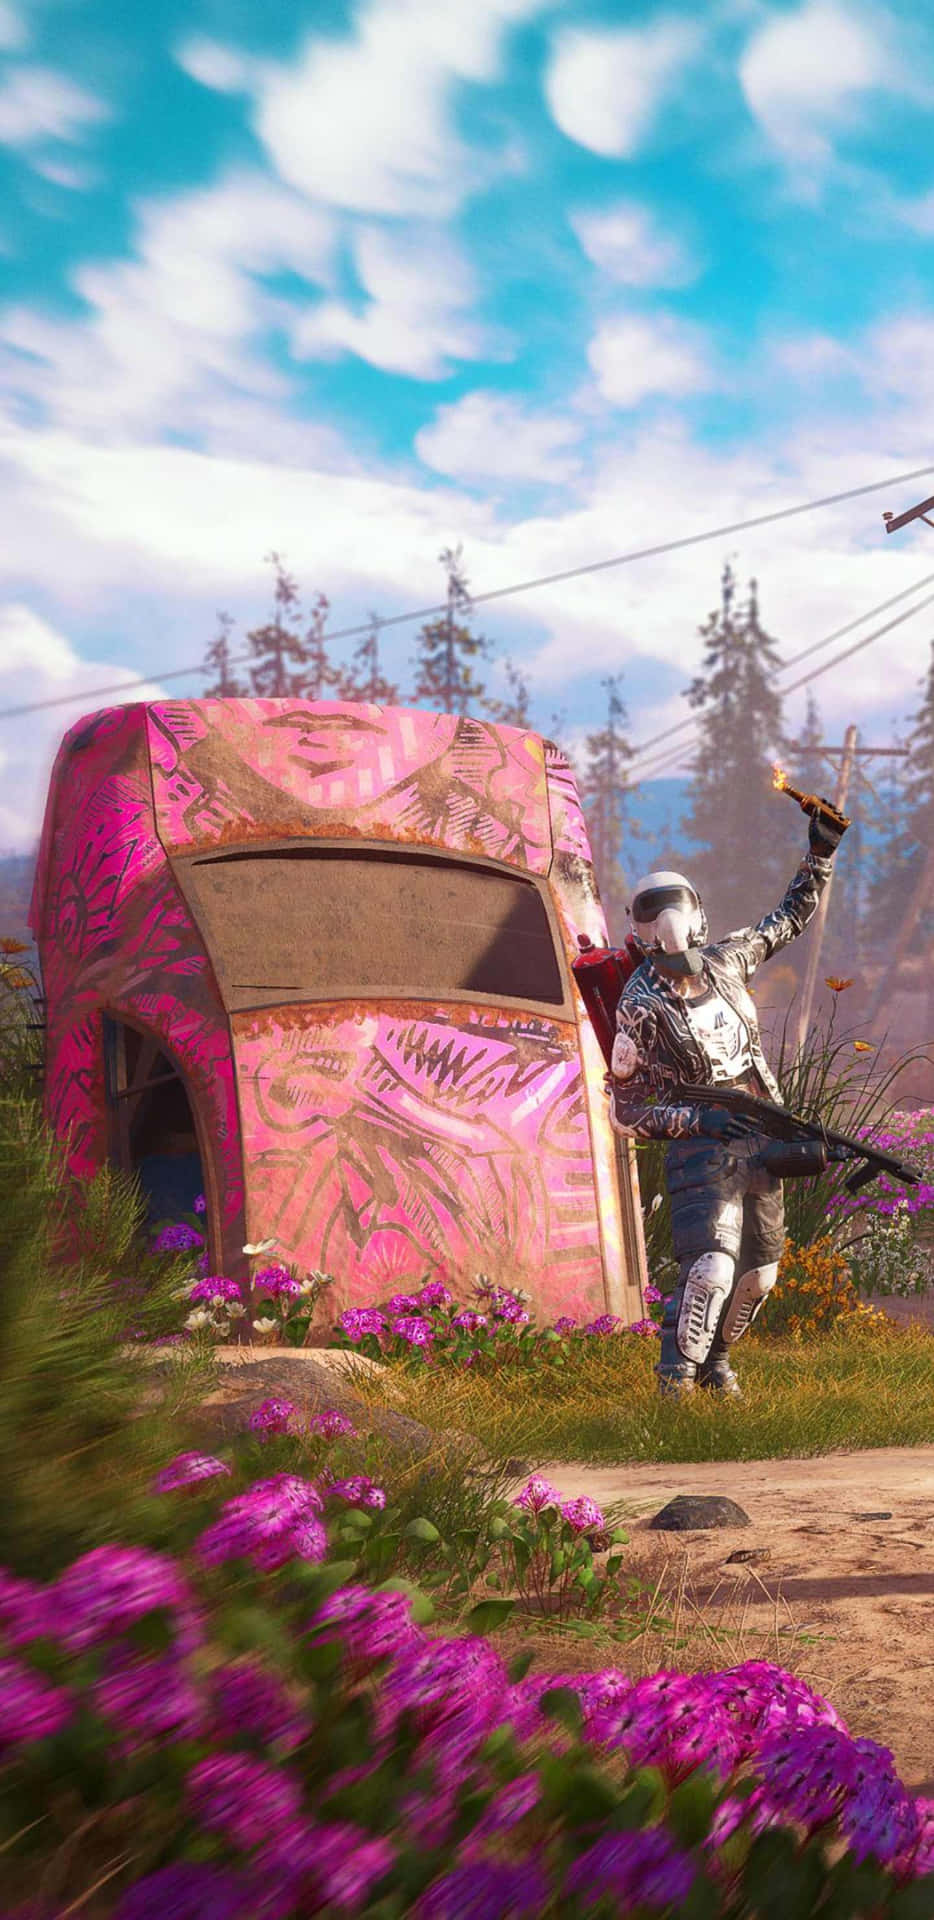 Explore a Post-Apocalyptic World with Far Cry New Dawn on Android